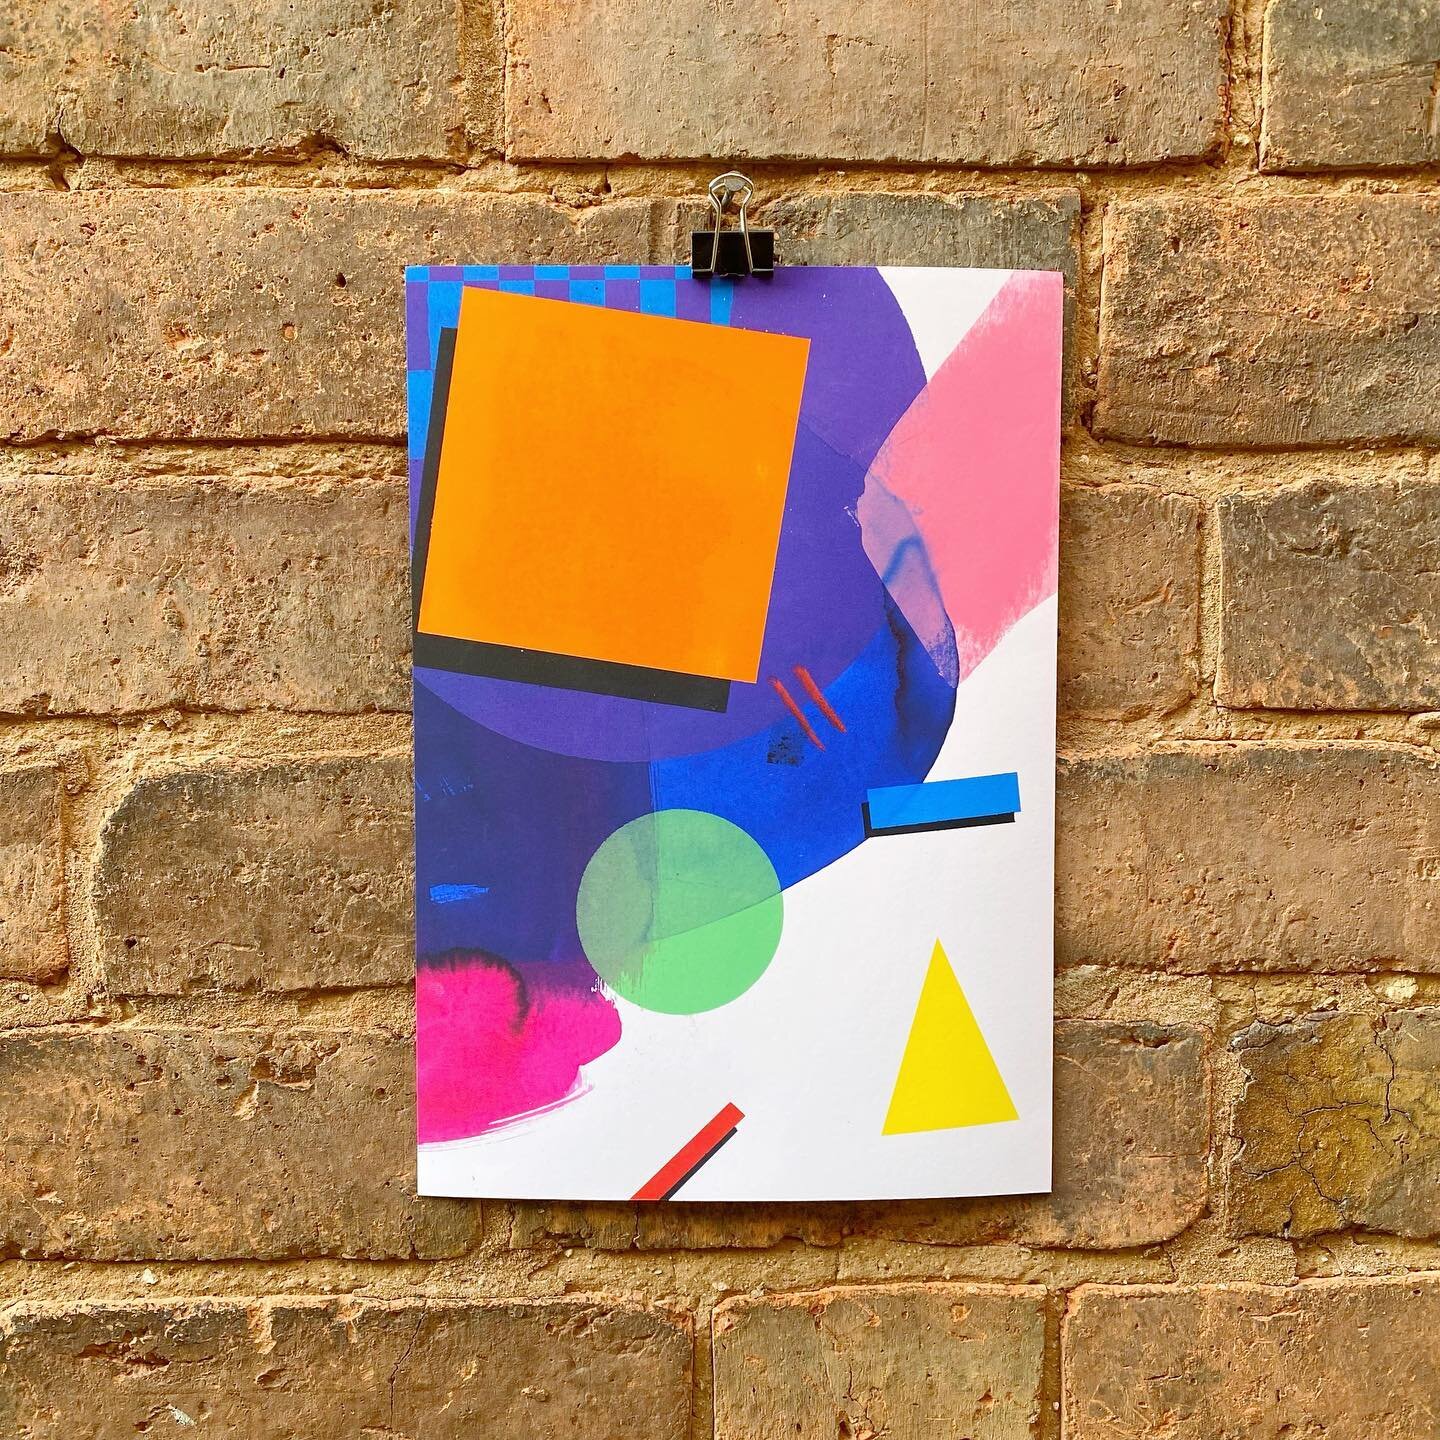 🚨NEW PRINT🚨

&lsquo;Pr.dhdr.05.23.&rsquo; available with 📦FREE SHIPPING 📦 in the following sizes:

A5 - &pound;6
A4 - &pound;15
A3 - &pound;25

Thanks again to the folks at @precision.imaging 🙏🏼
.
.
.
.
.
#abstractillustration #illustration #ar